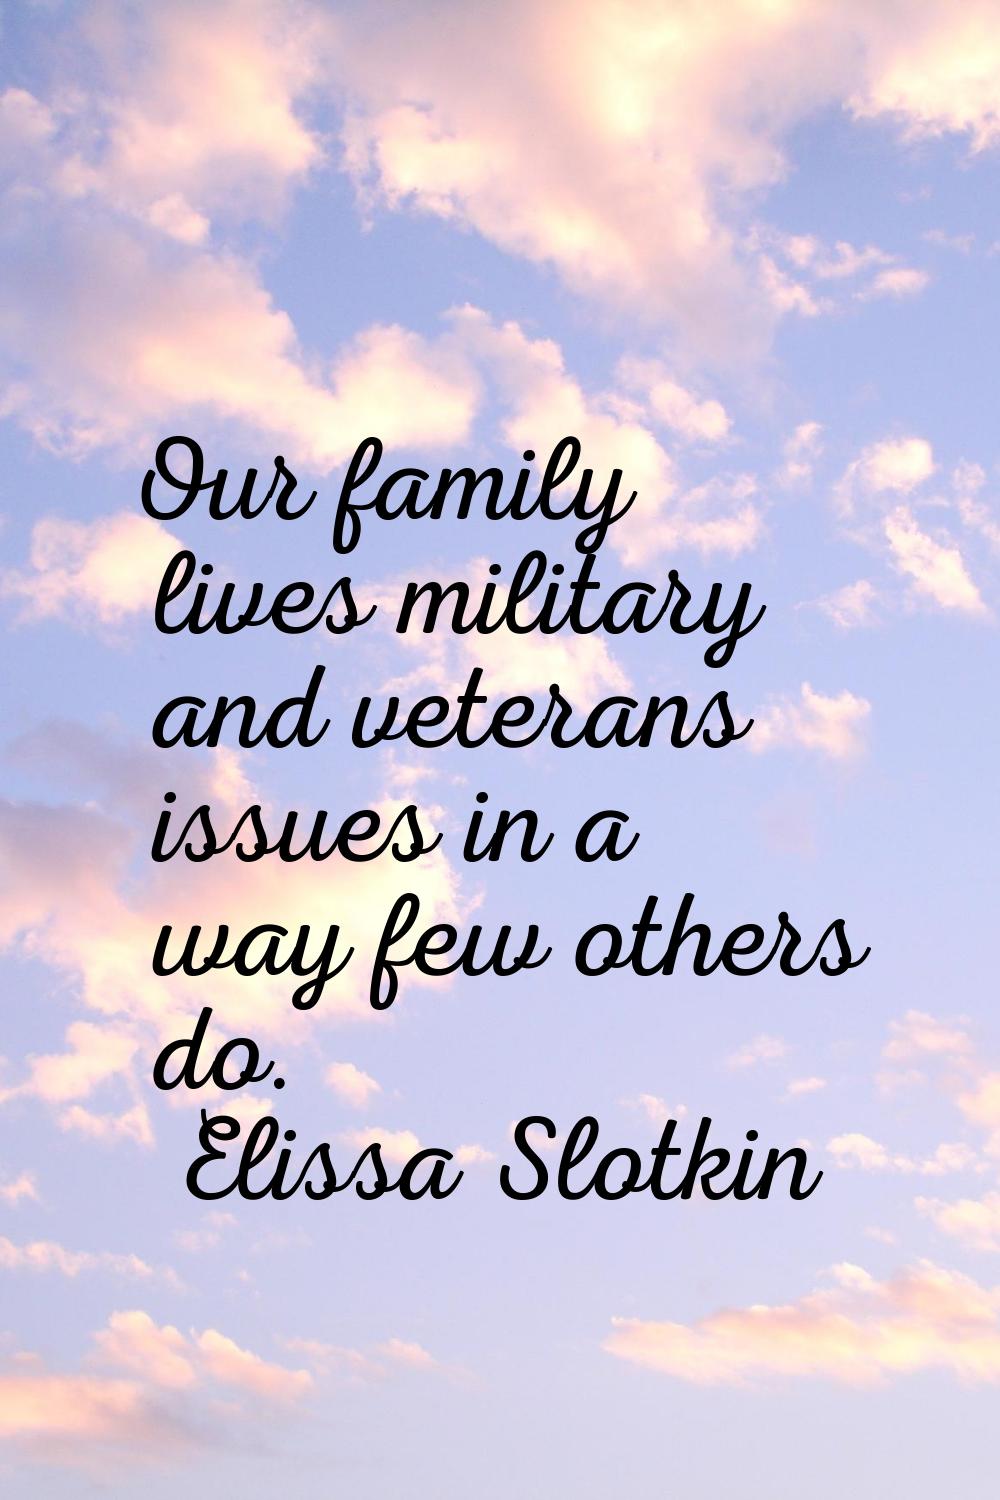 Our family lives military and veterans issues in a way few others do.